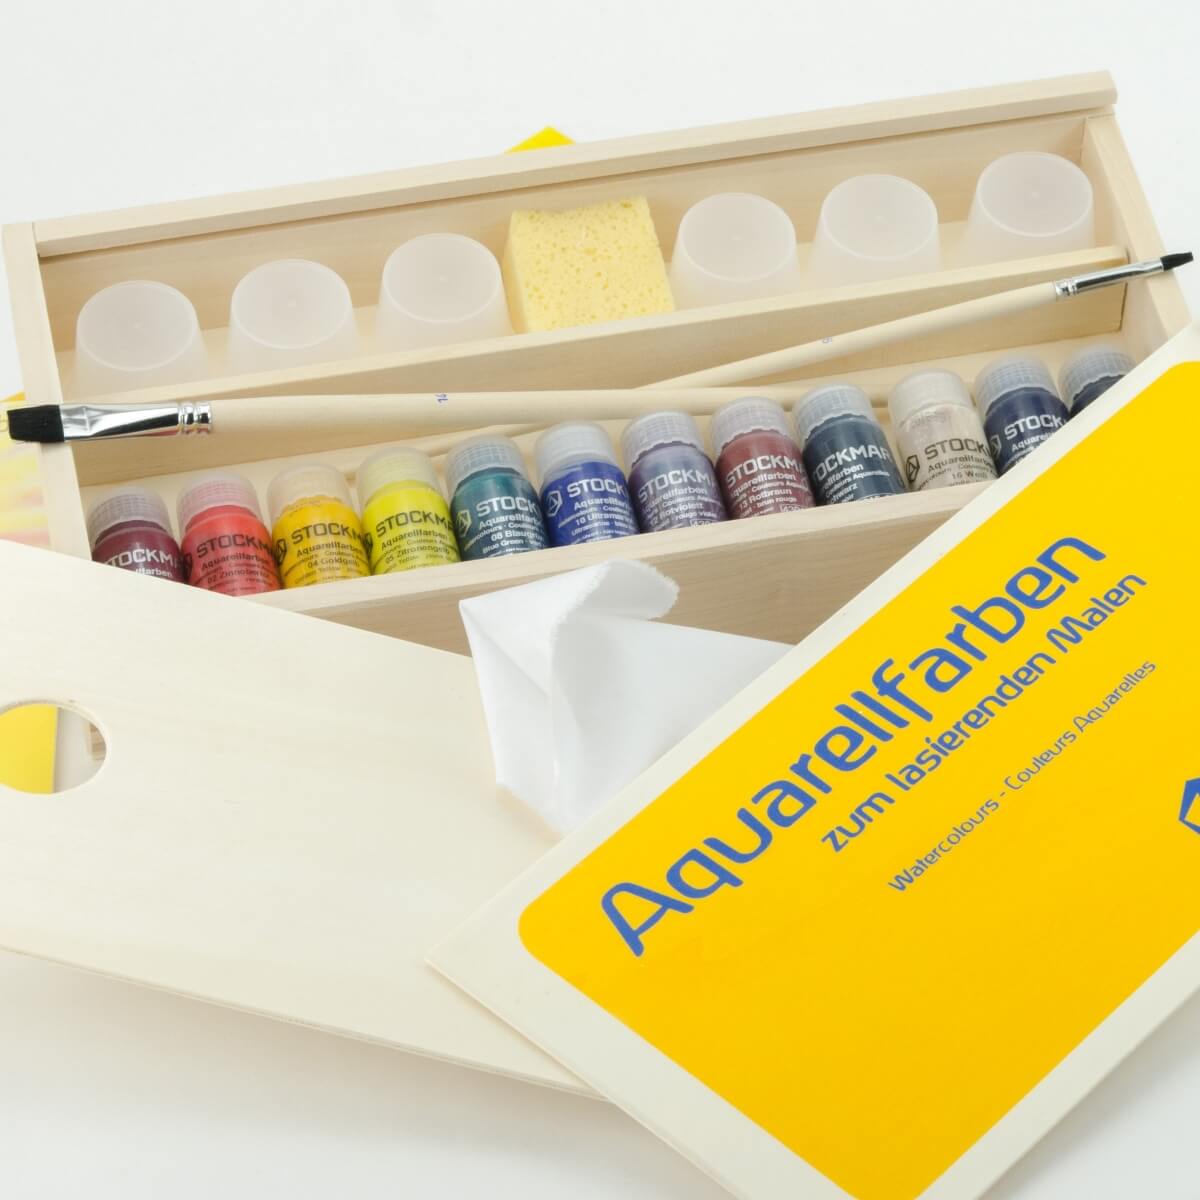 85043046 Stockmar Aquarelle Watercolours 12x20 ml in Wooden Box with accessories